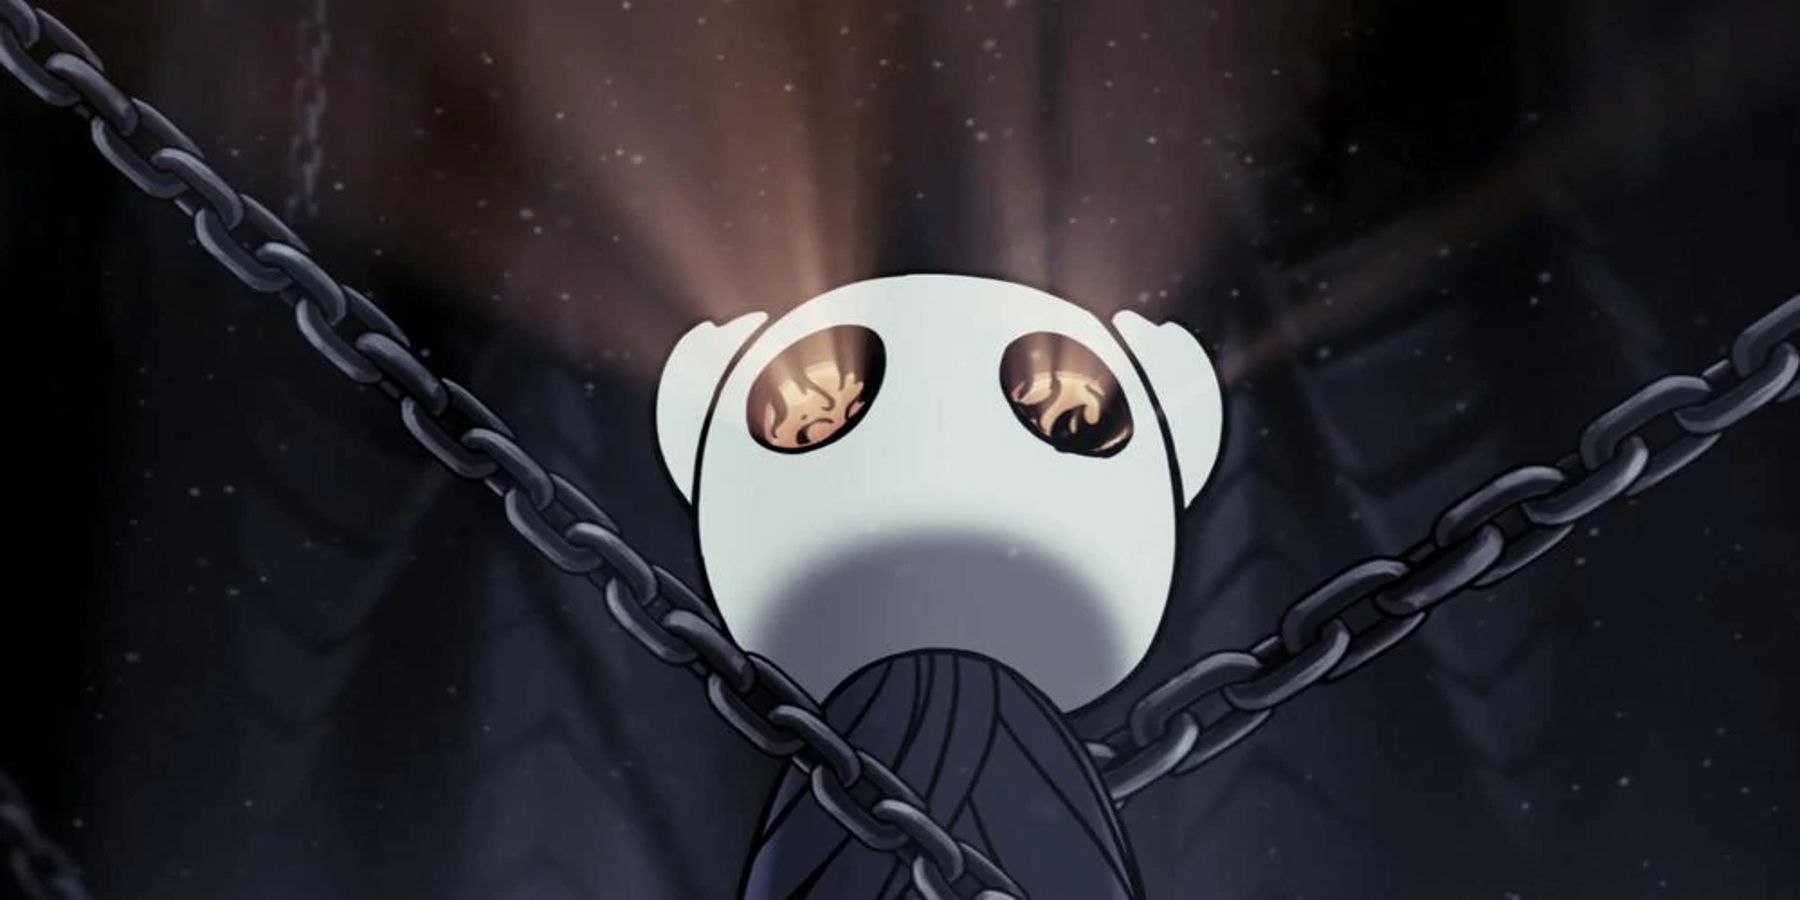 One of Hollow Knight's endings where the Knight is sealed away